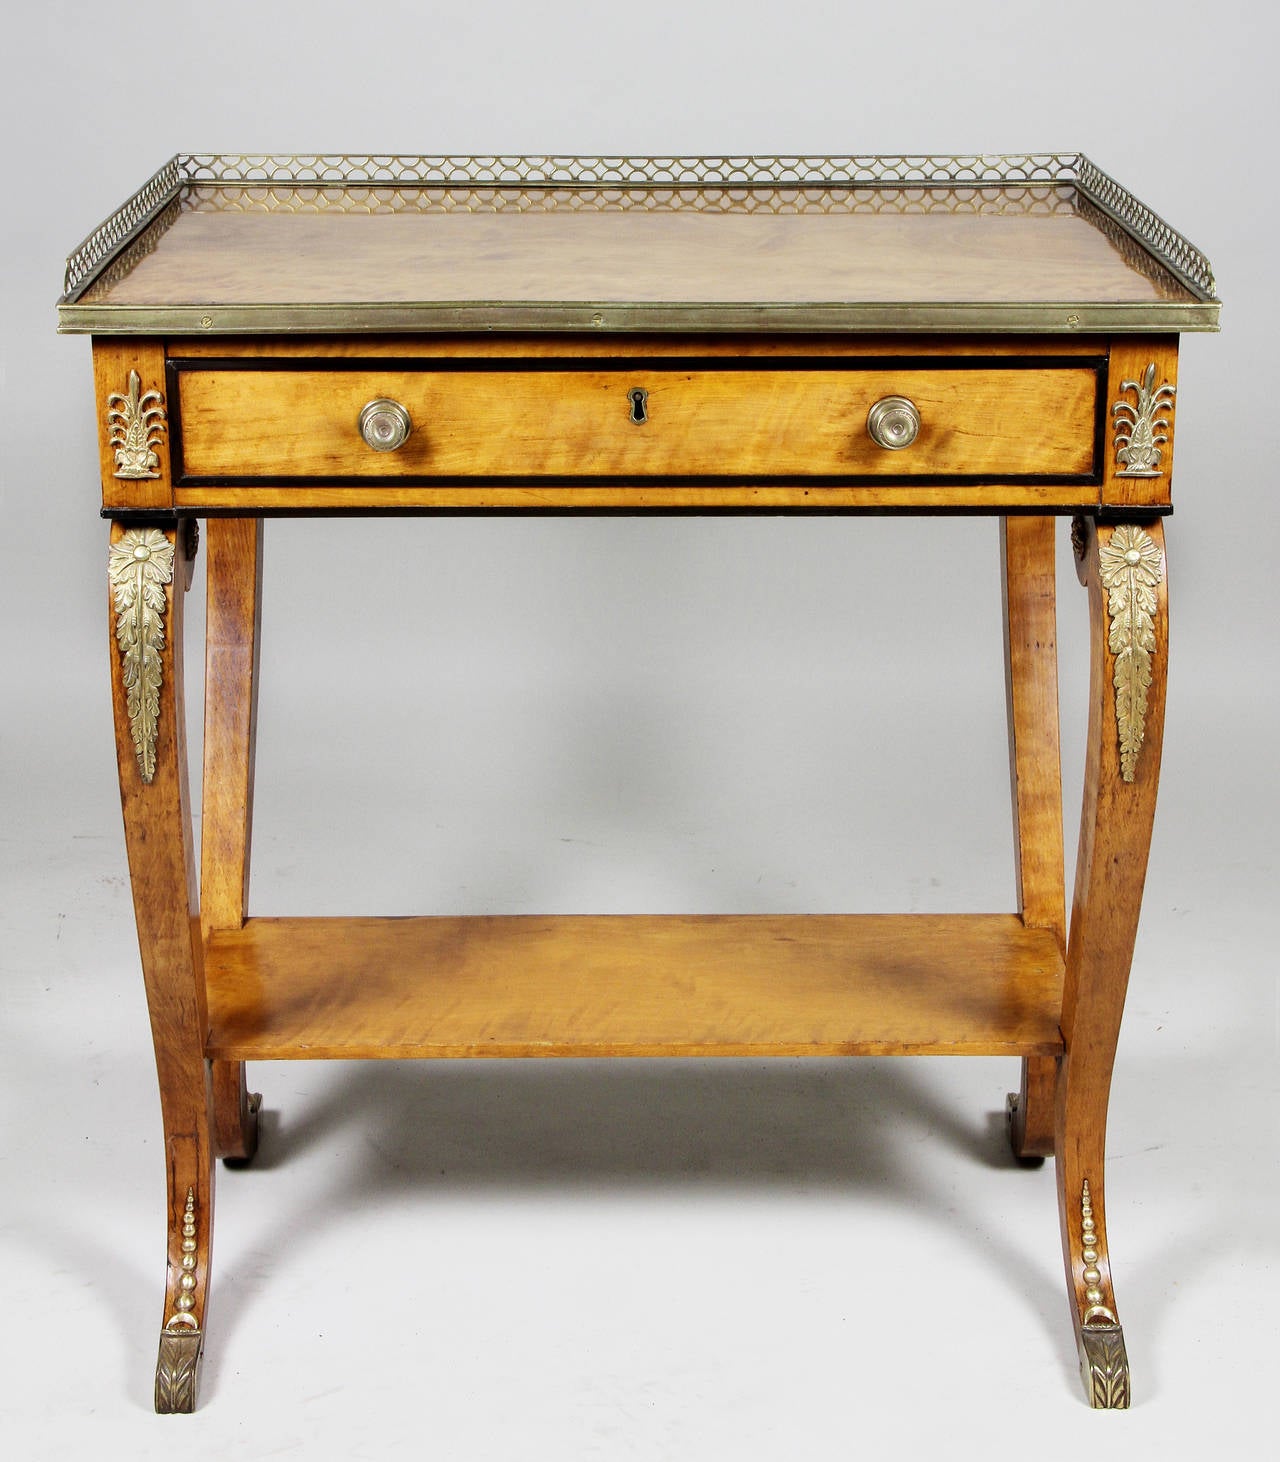 Rectangular with 3 /4 brass gallery over a drawer, in swept legs with lower shelf. Probably by Gillows of Lancaster.